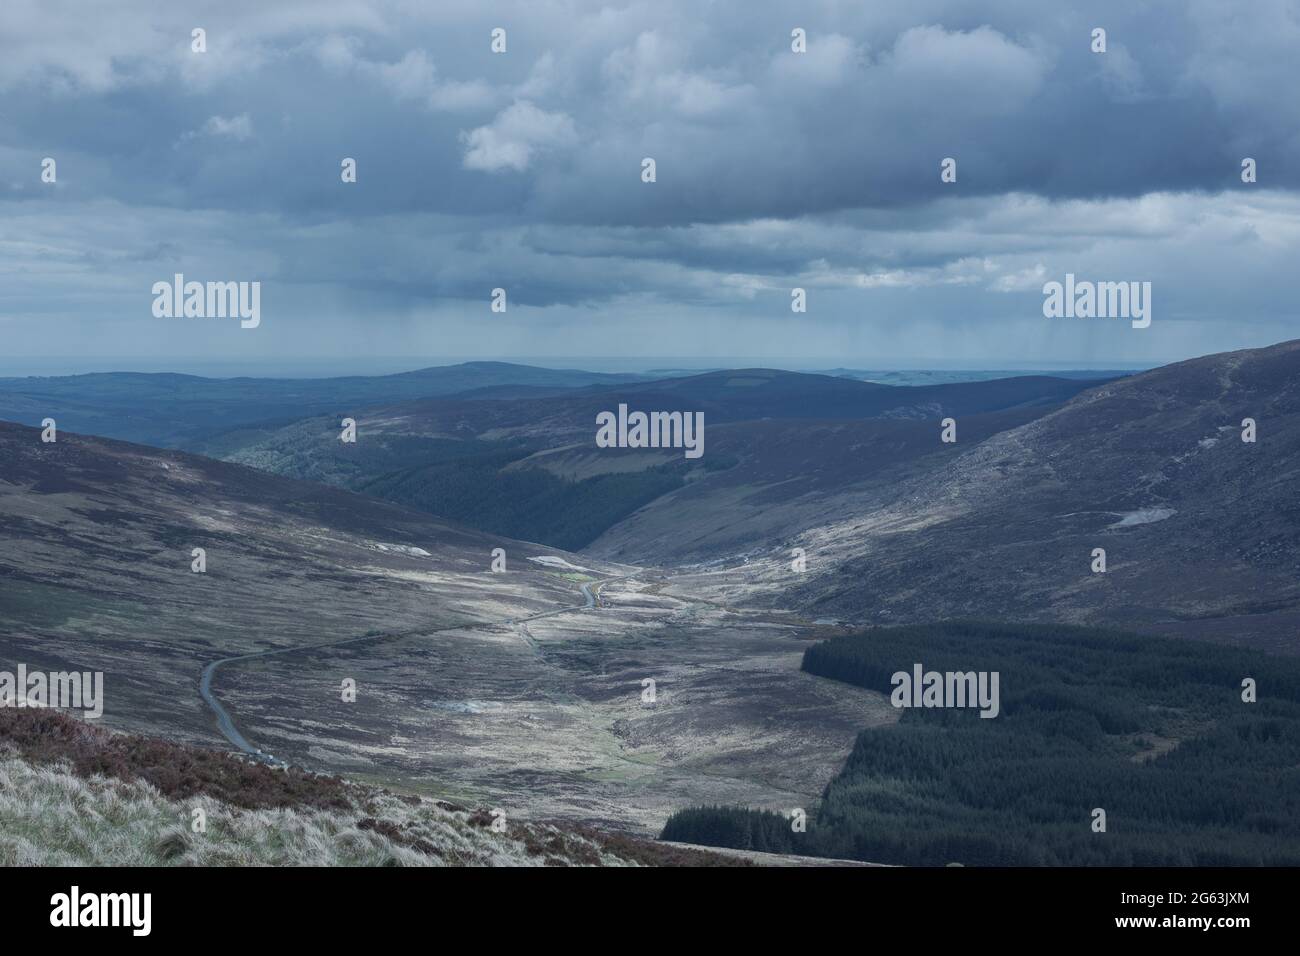 View from Tonelagee Hill. Amazing landscape in Wicklow Mountains, Ireland. Stock Photo